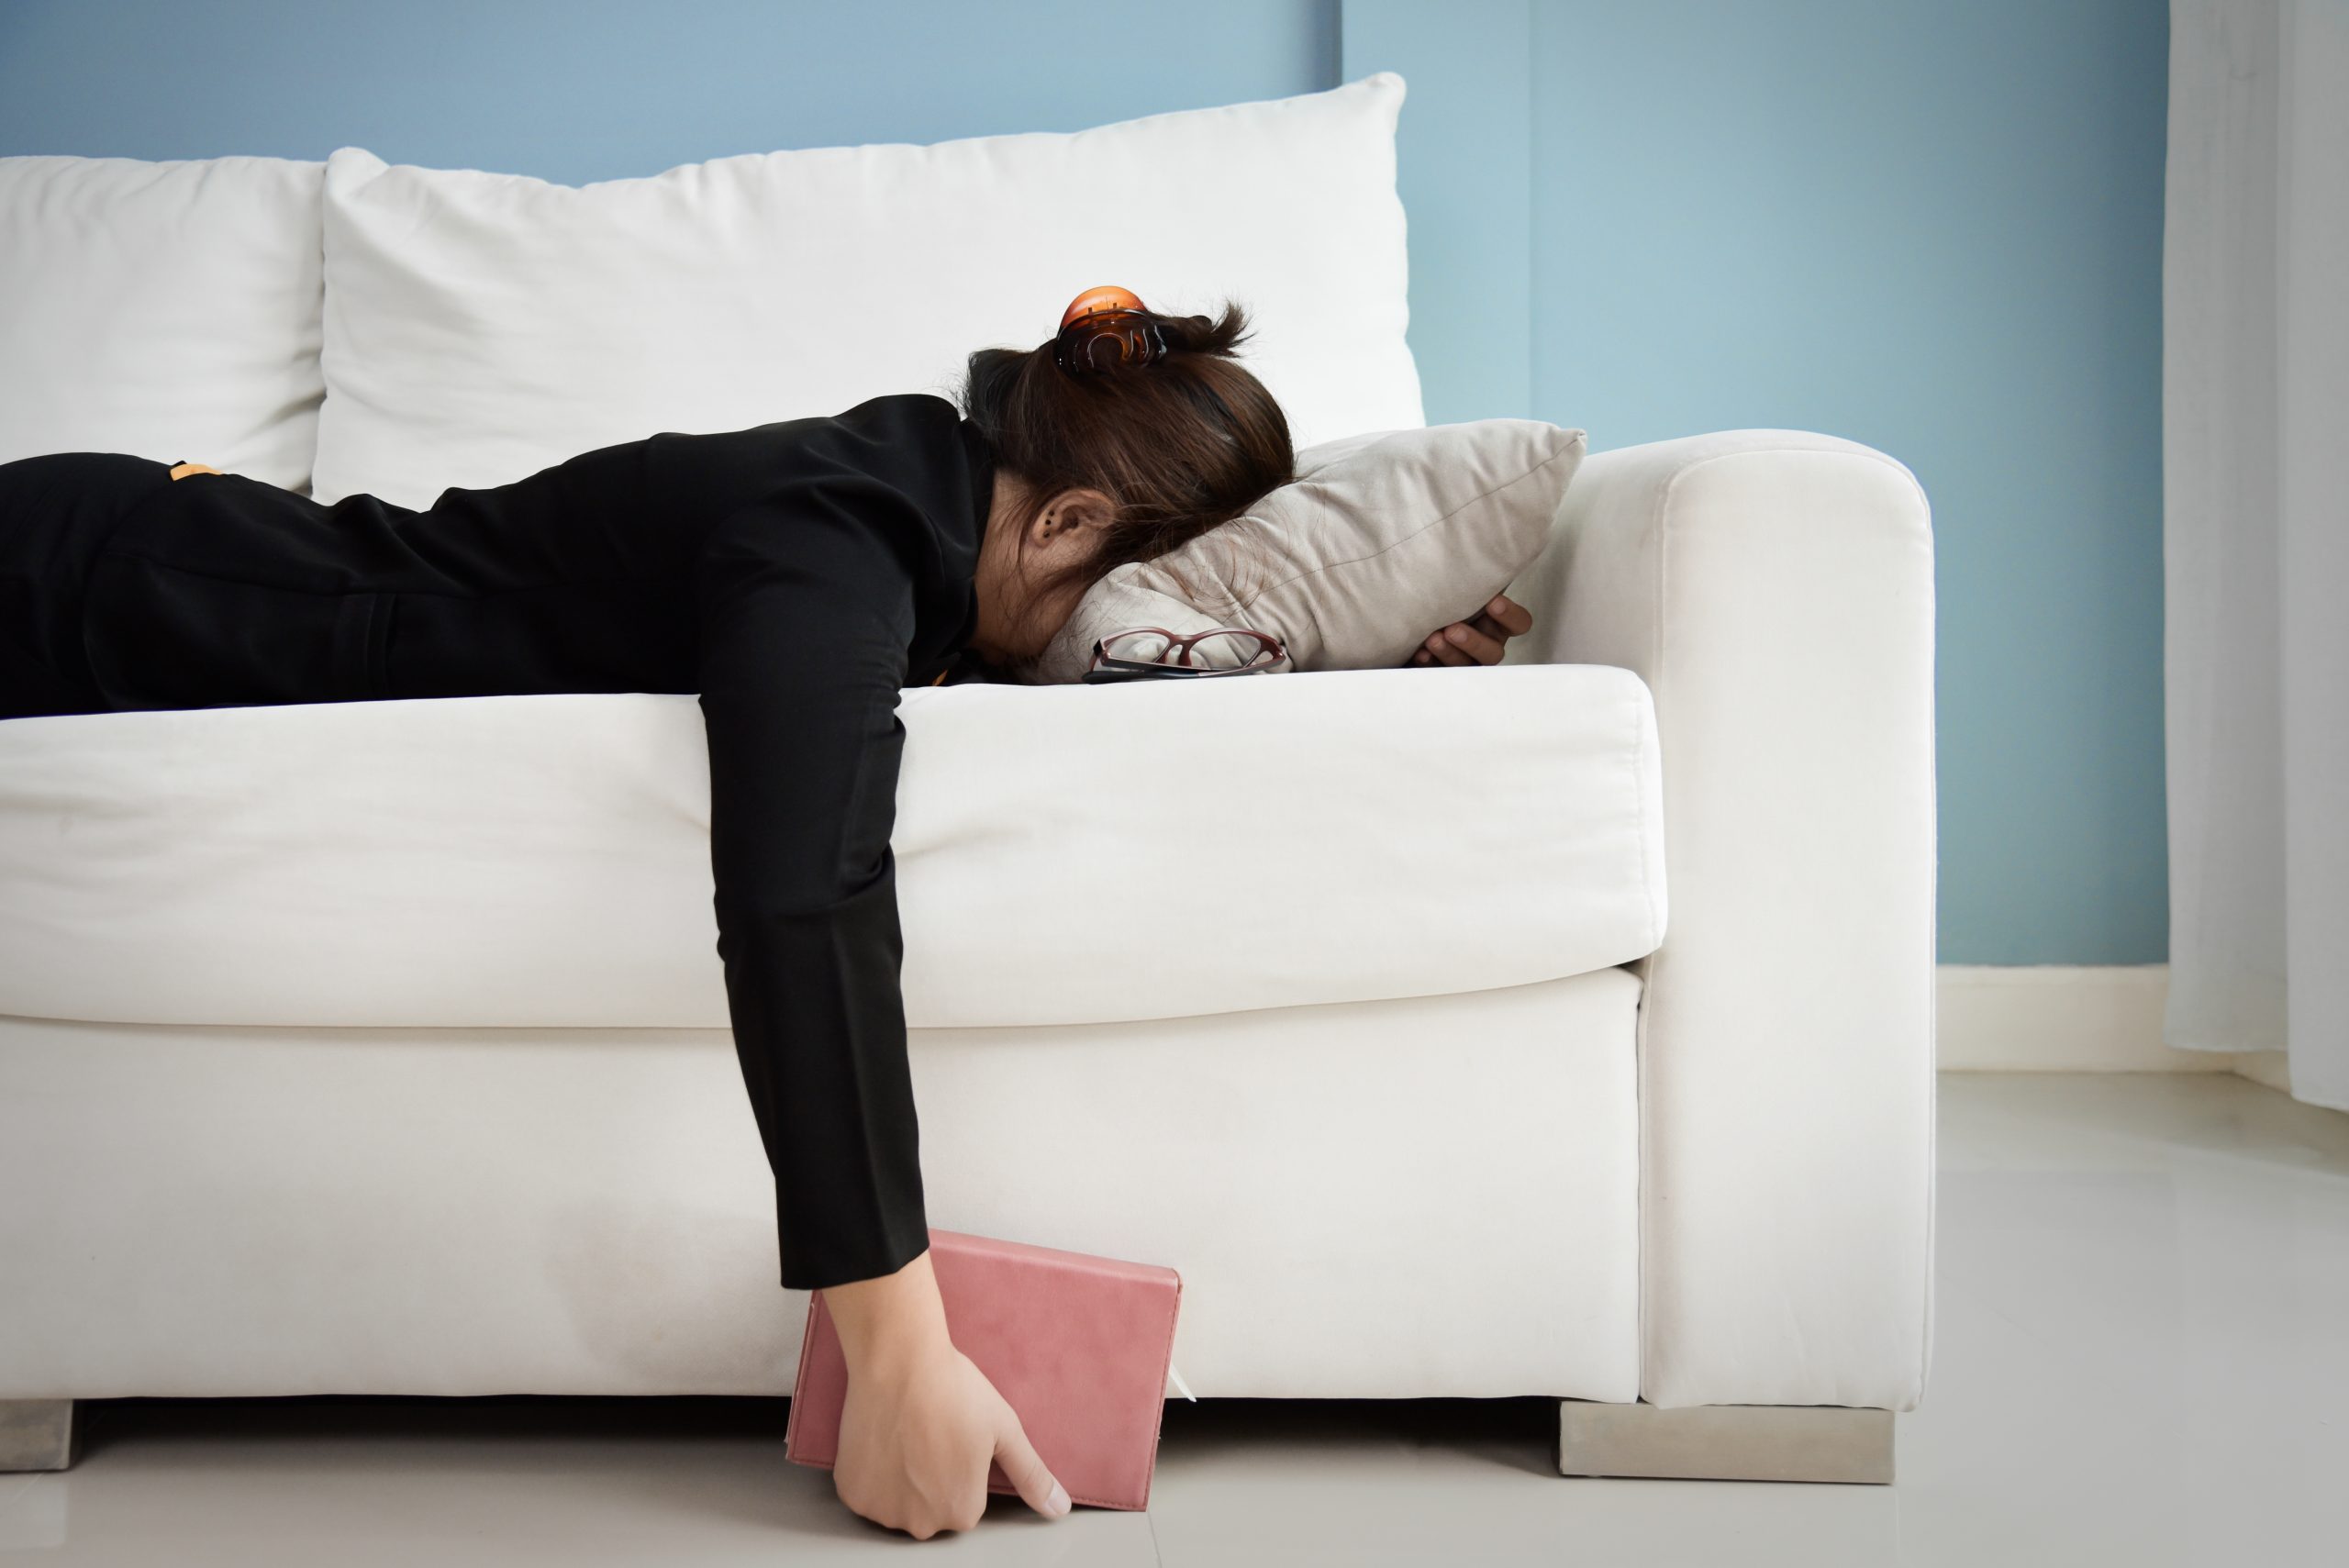 Business woman collapse face-down on couch